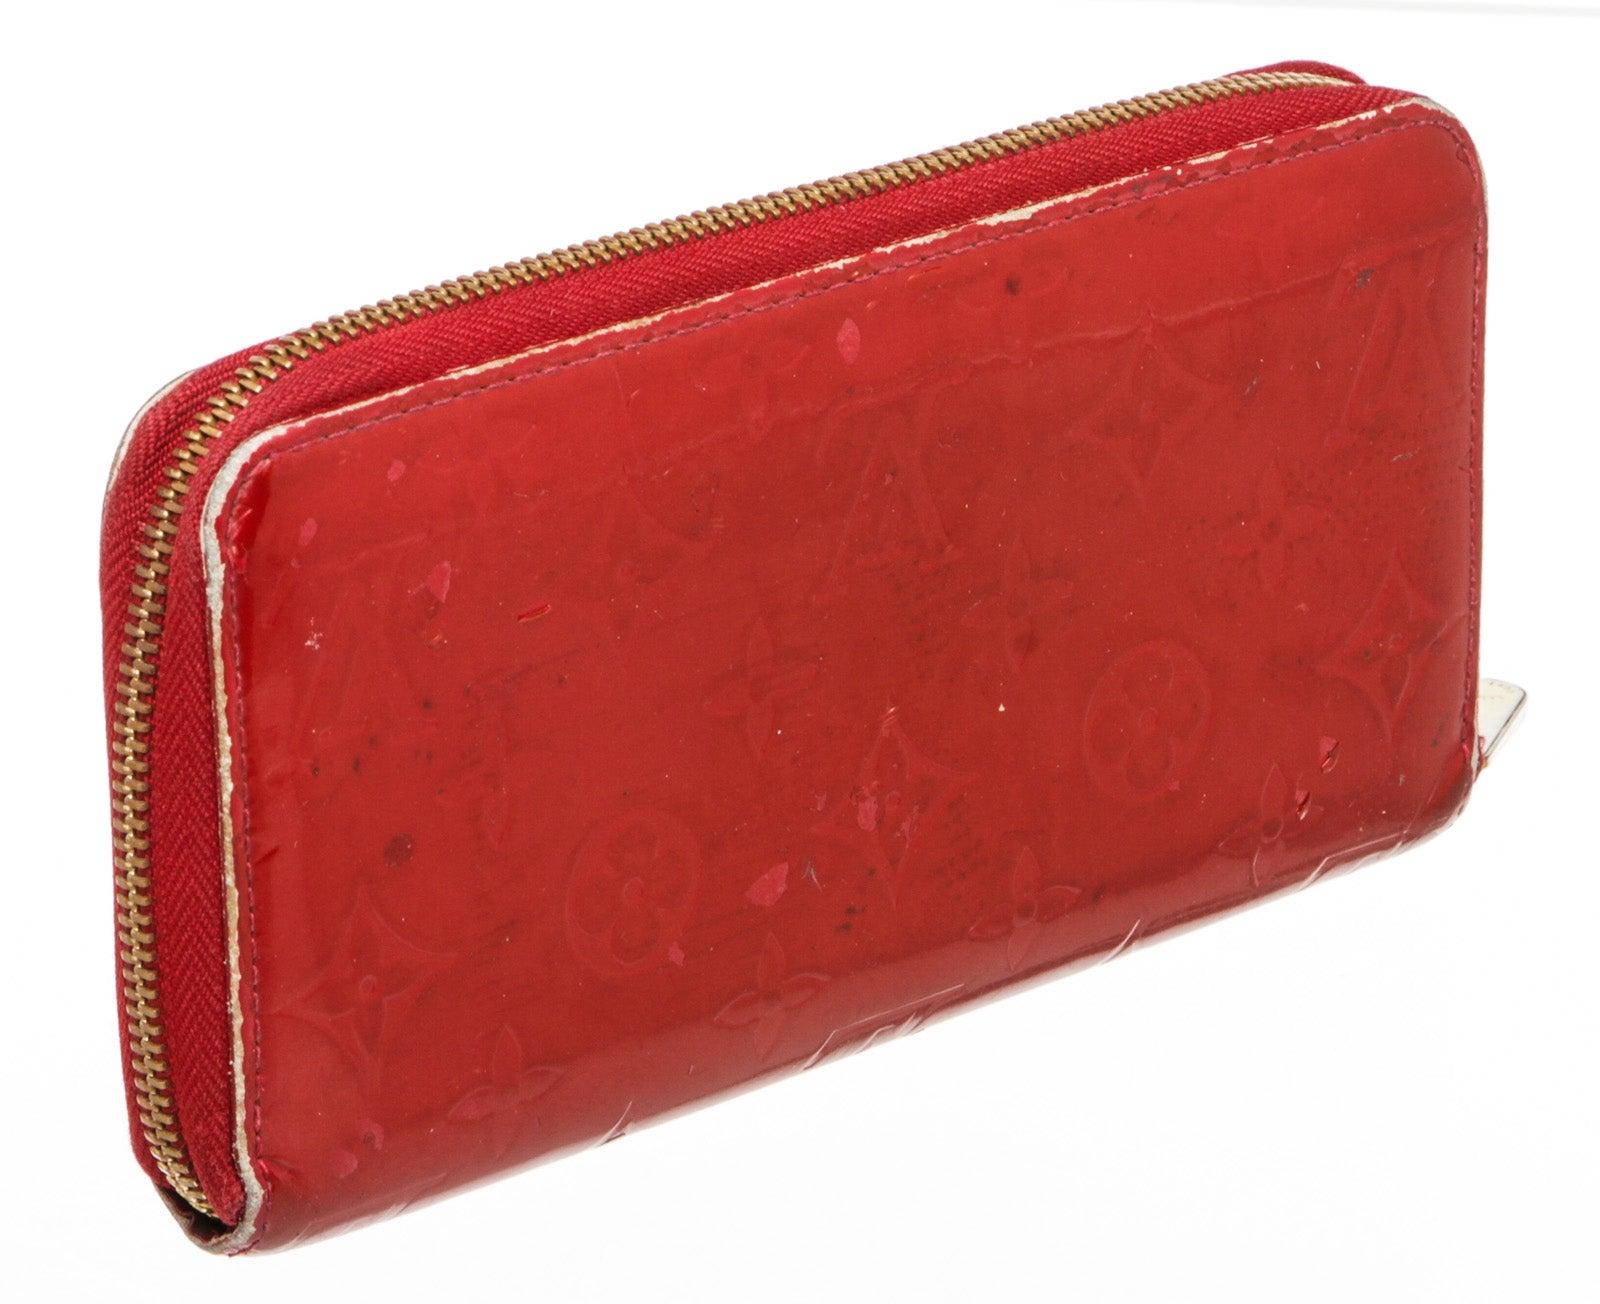 Red Vernis leather Louis Vuitton Zippy wallet with gold-tone hardware, tonal leather lining, four interior compartments; one with zip closure, three bill compartments, eight card slots and zip-around closure.
17596MSC